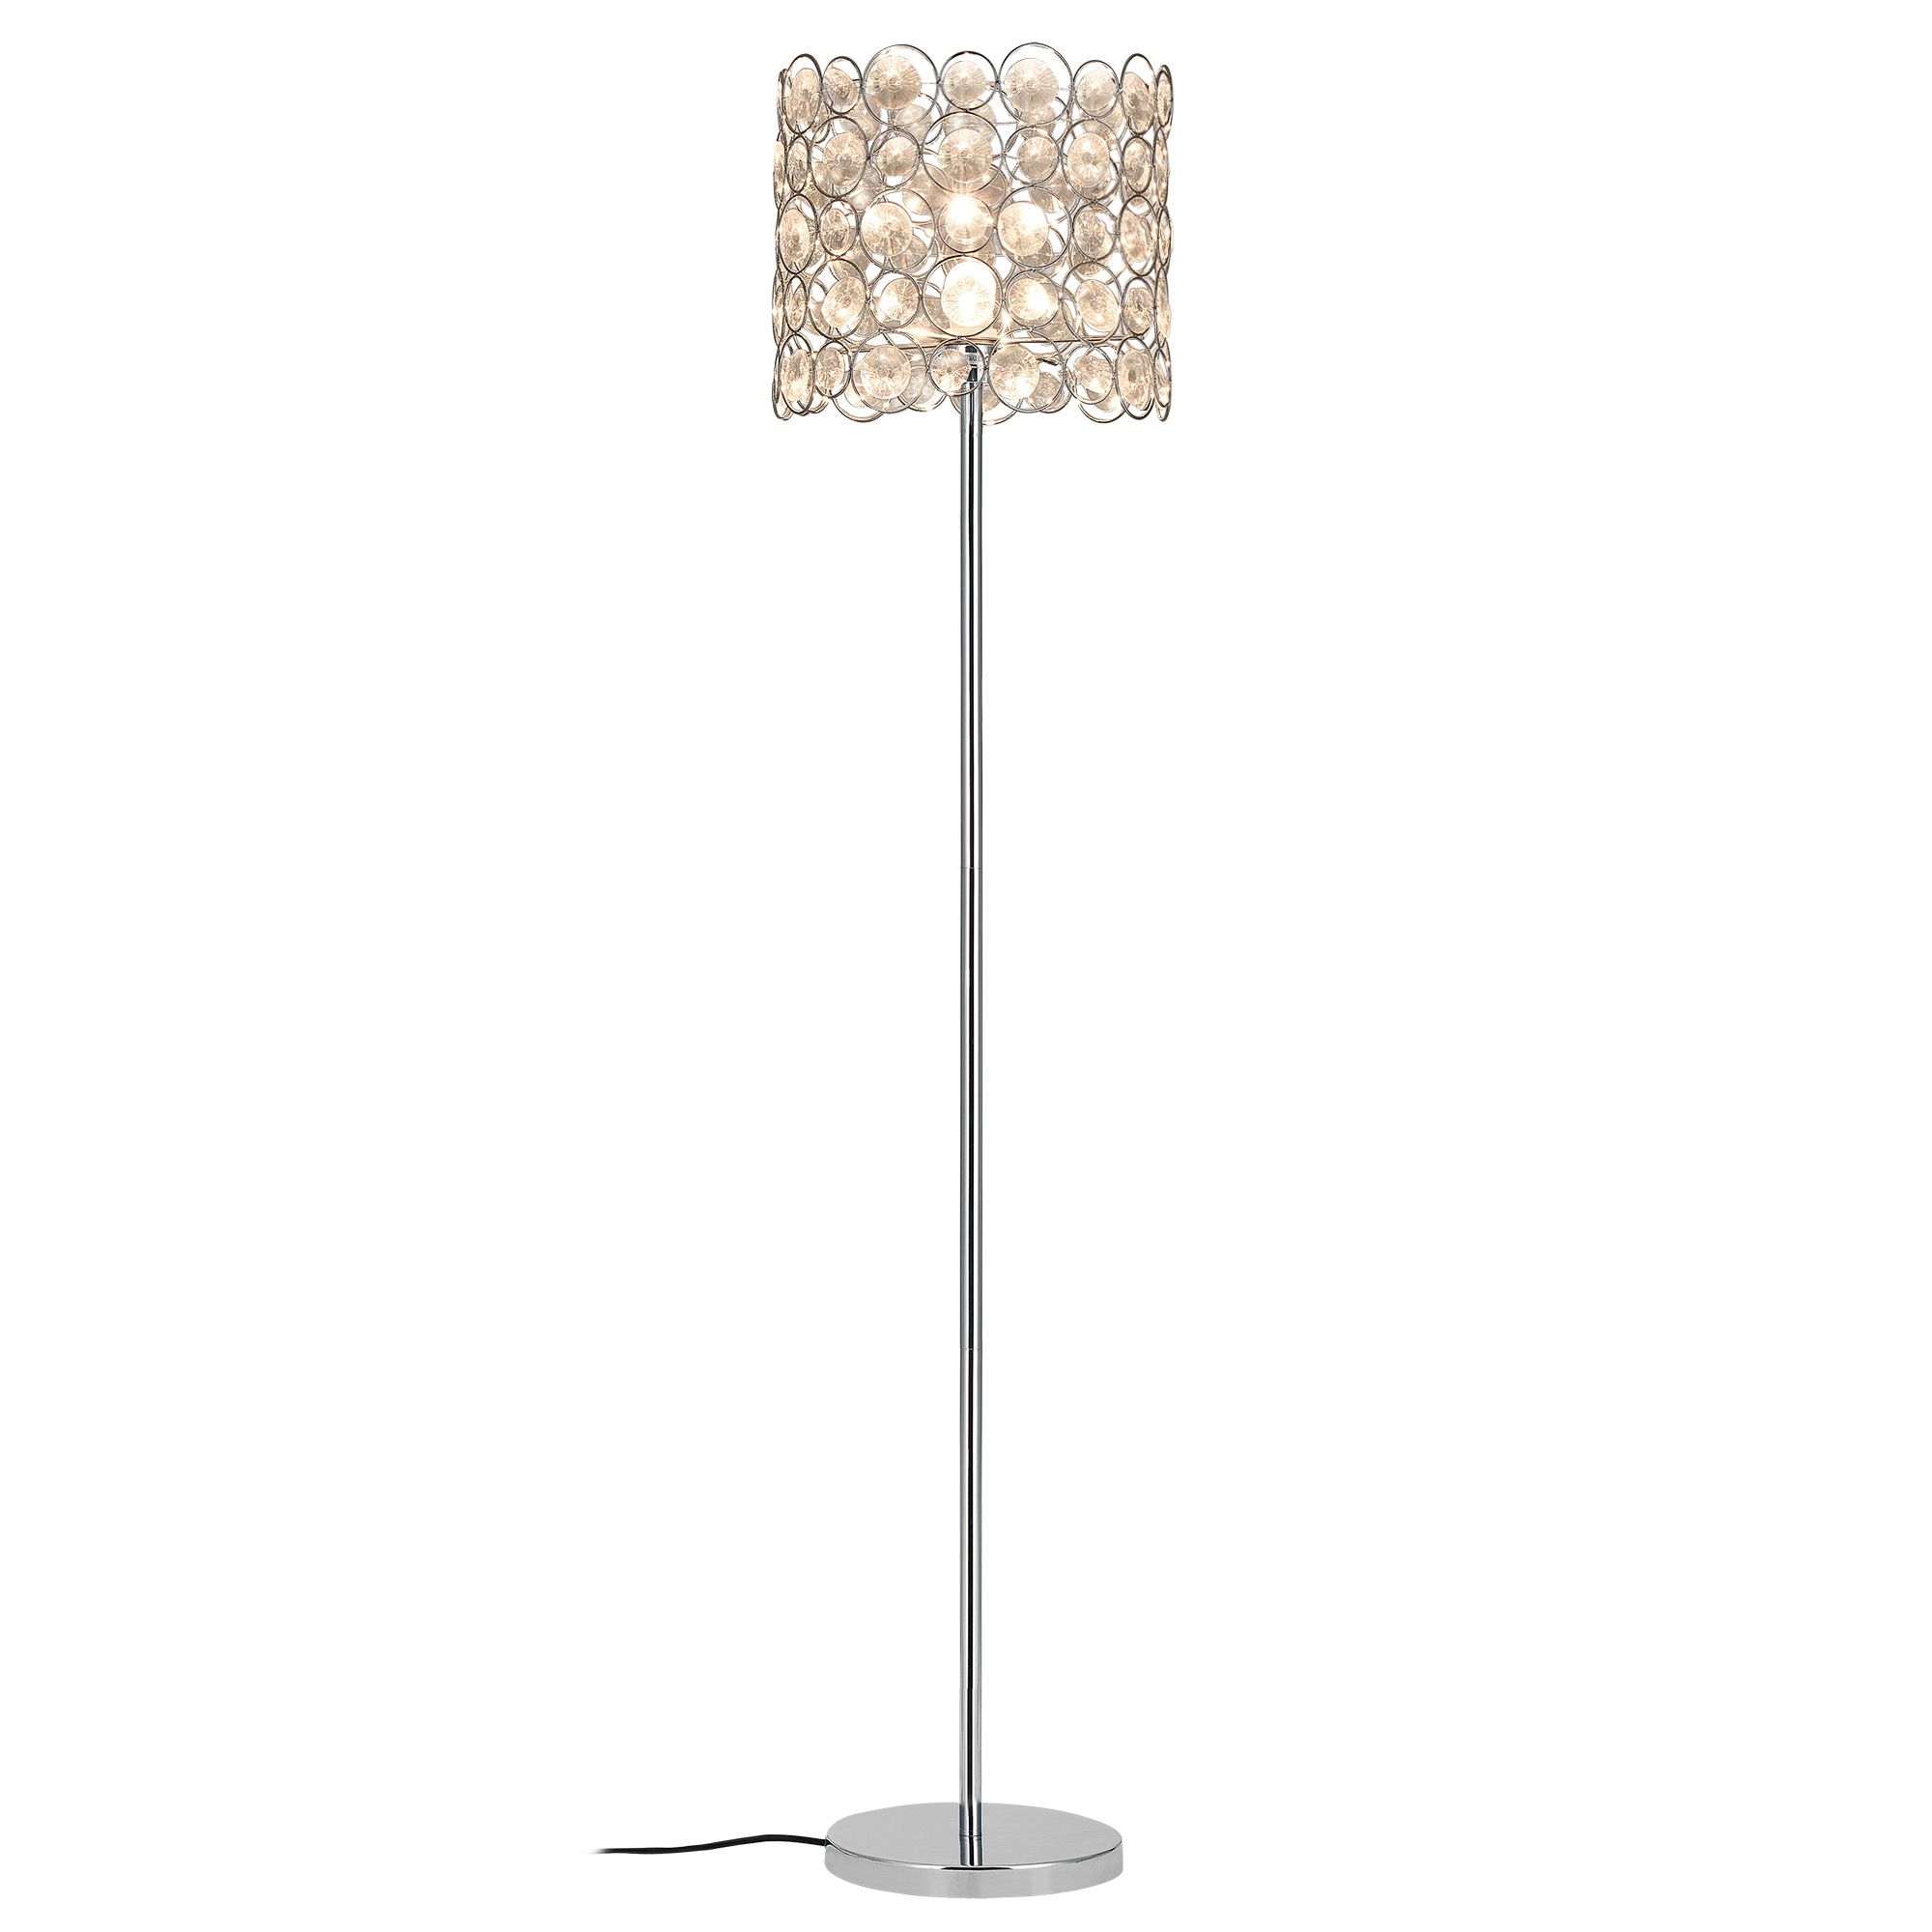 [lux.pro] Stojací lampa \"CrystalTree\" HT167063 - H.T. Trade Service GmbH & Co. KG